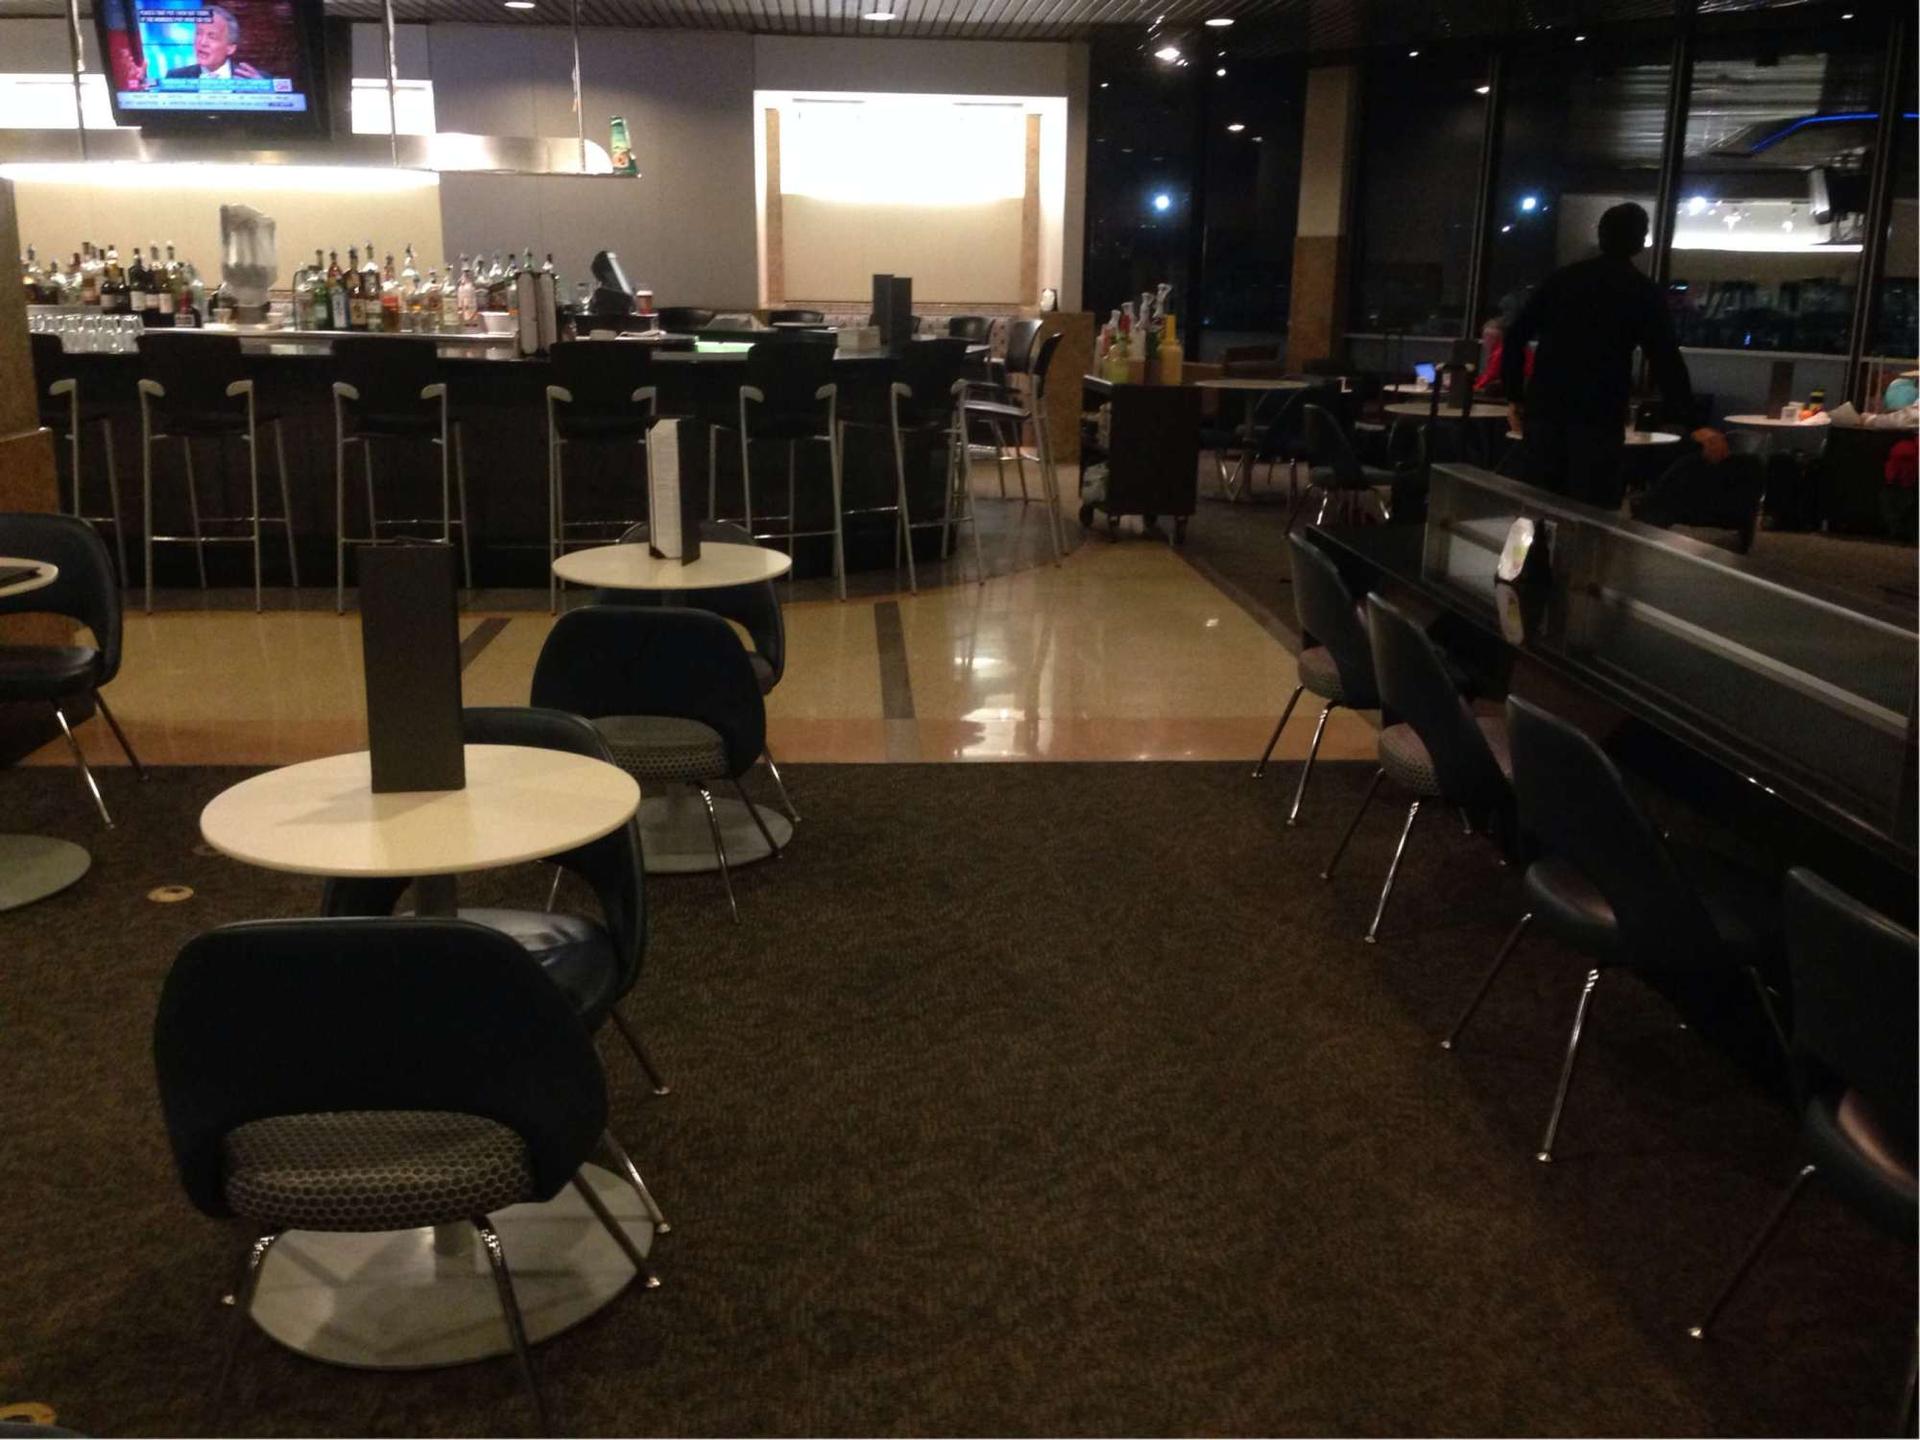 American Airlines Admirals Club image 8 of 50